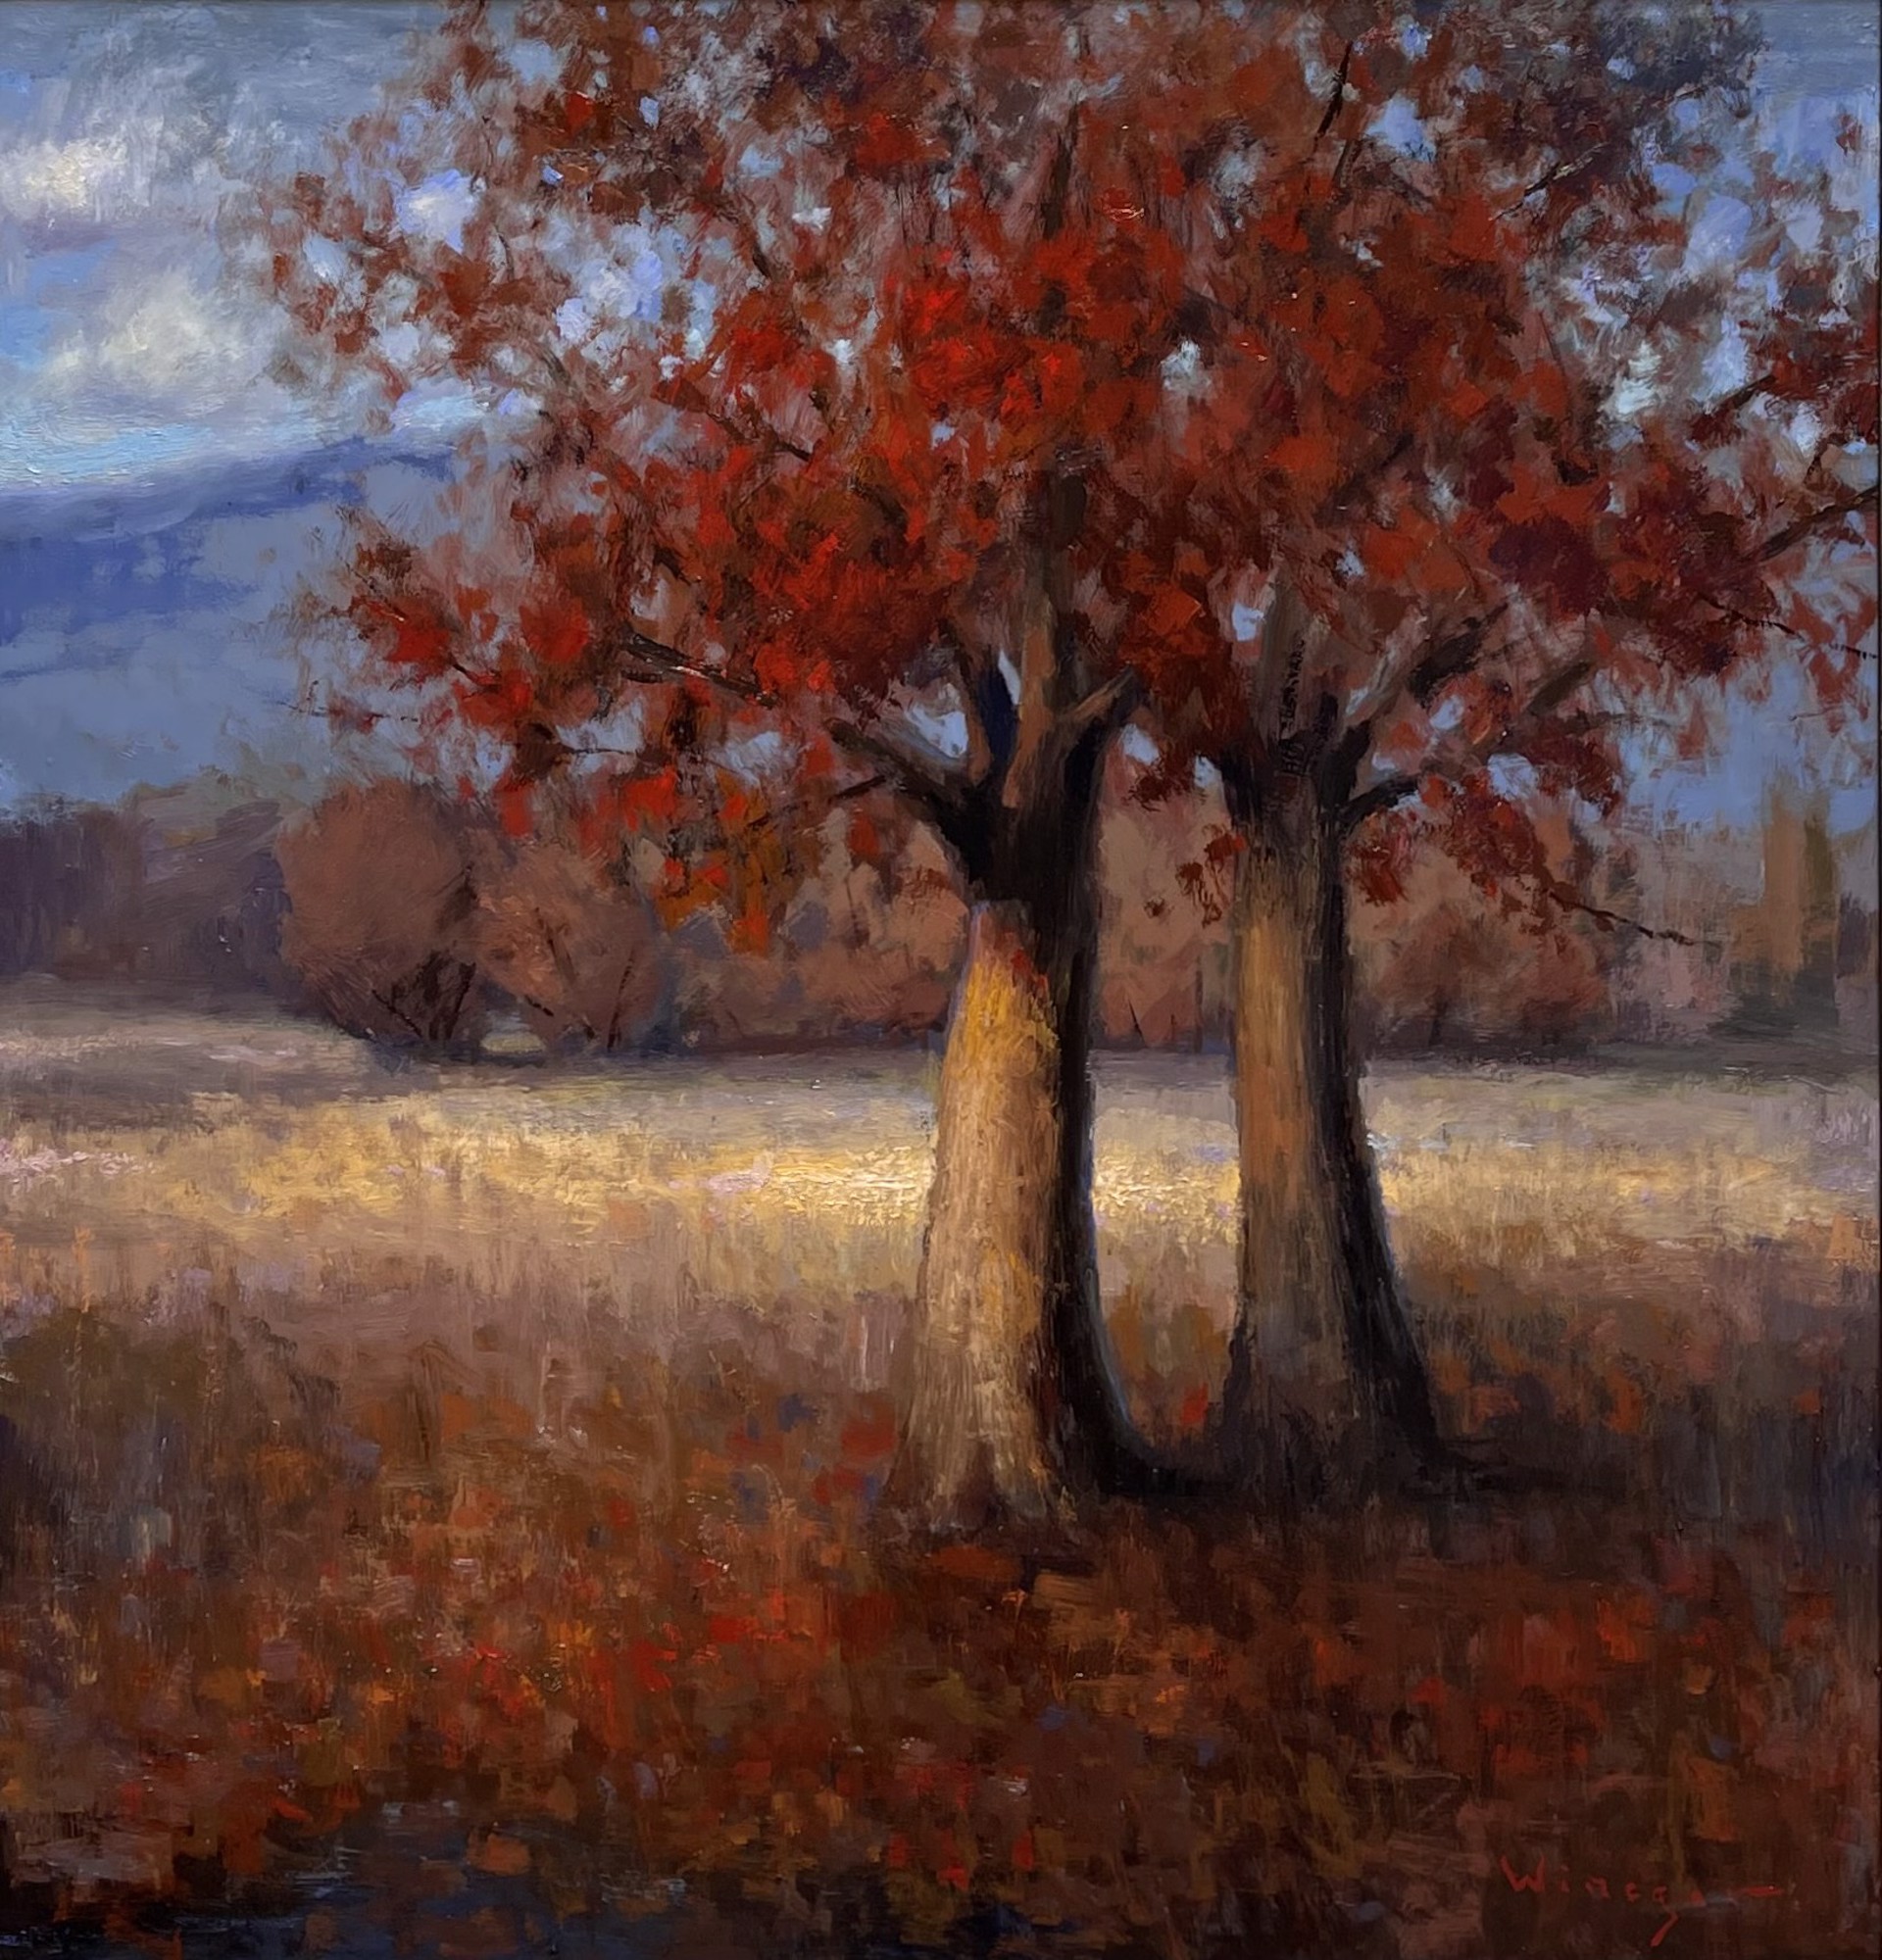 Life Transitions of Fall by Seth Winegar